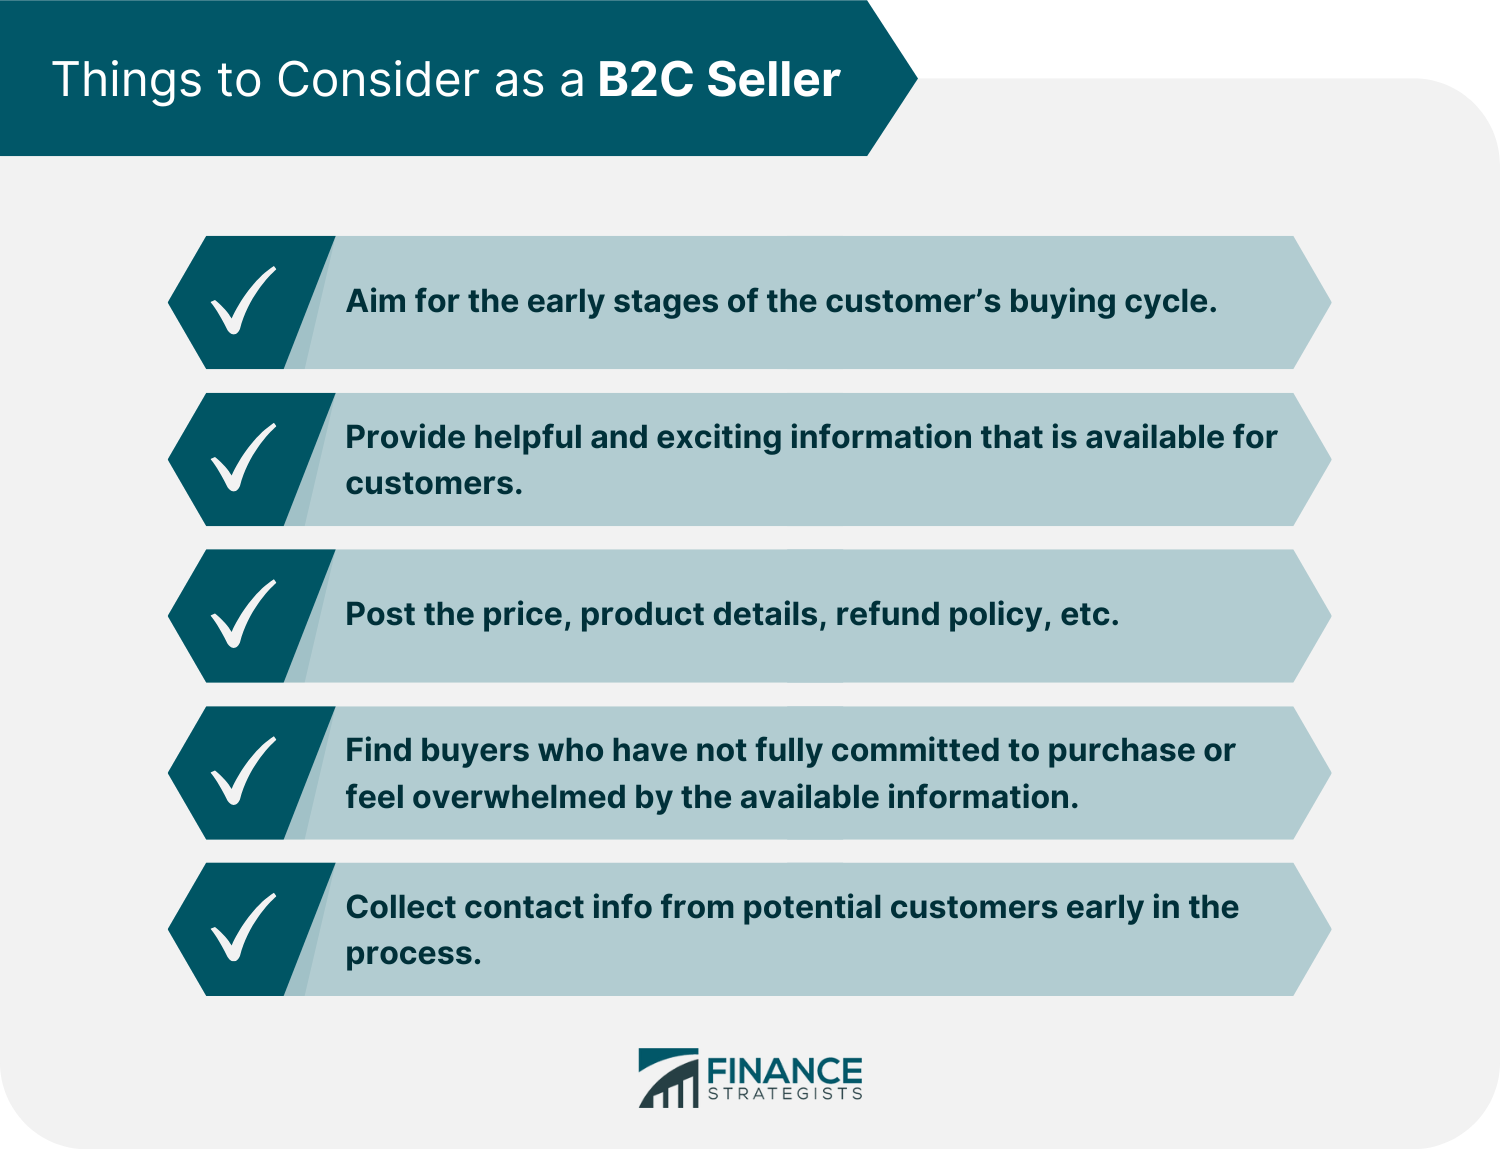 Things to Consider as a B2C Seller